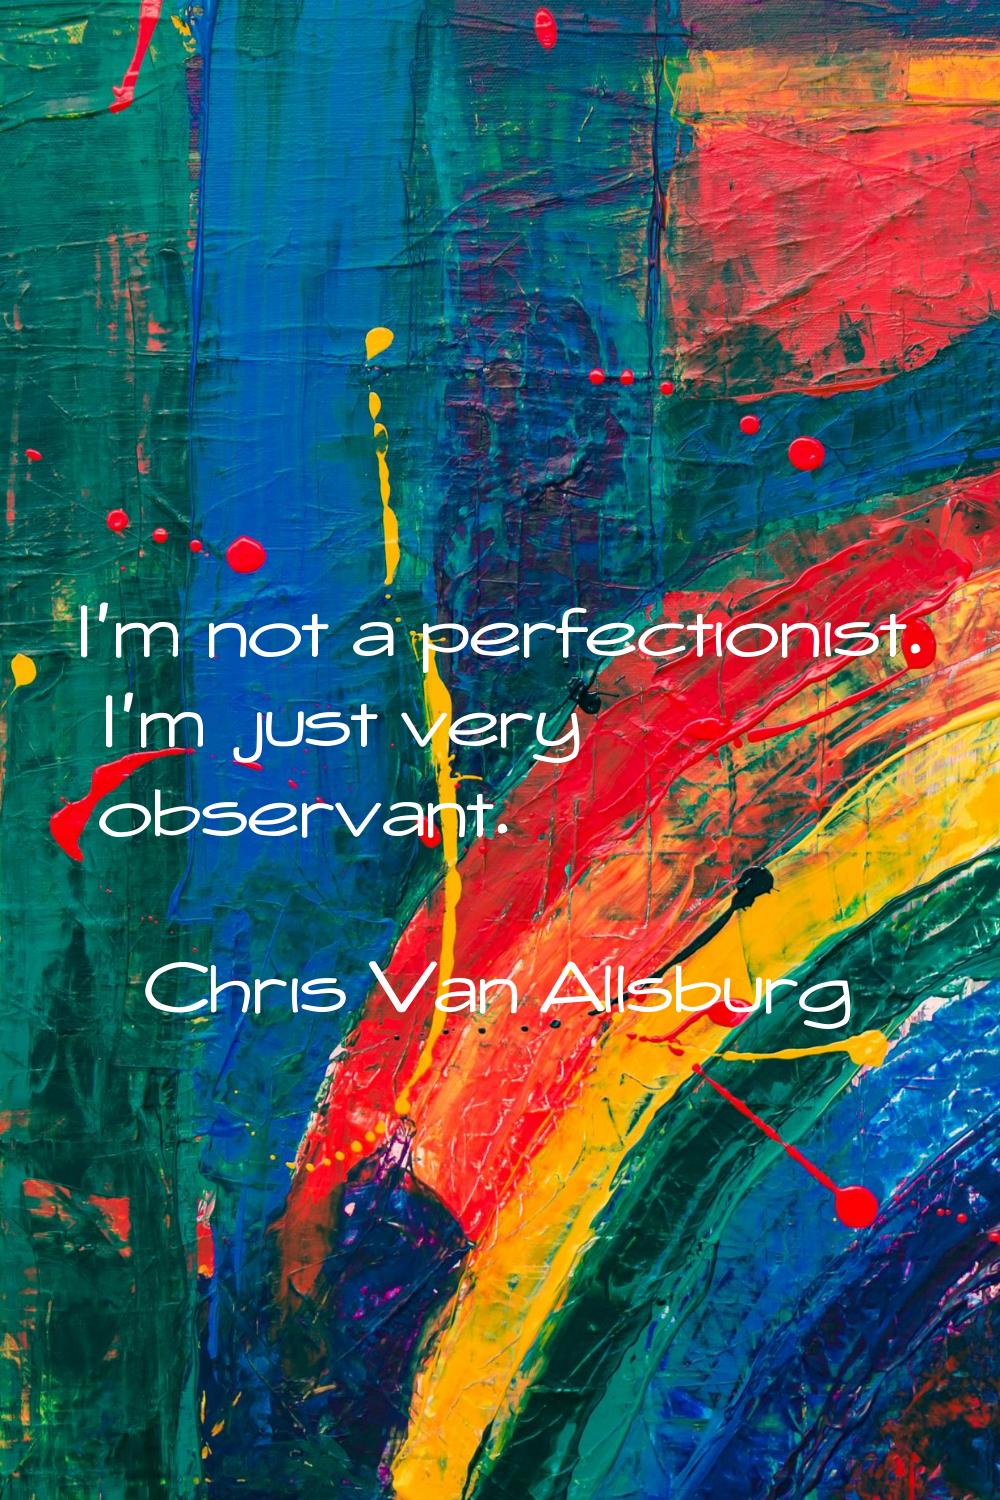 I'm not a perfectionist. I'm just very observant.